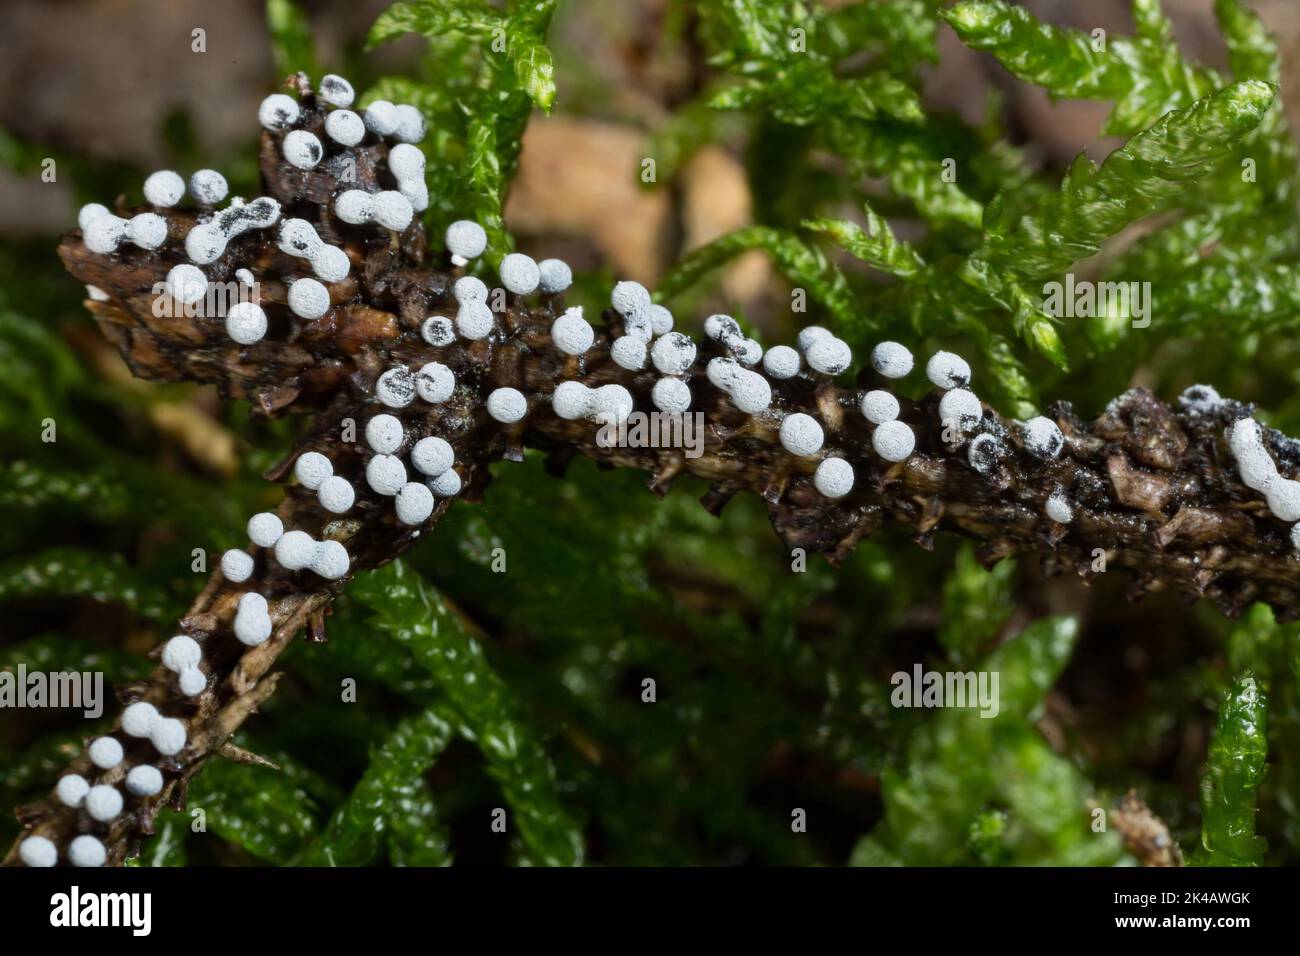 Grey globe slime mould many spherical greyish fruiting bodies next to each other on branches Stock Photo